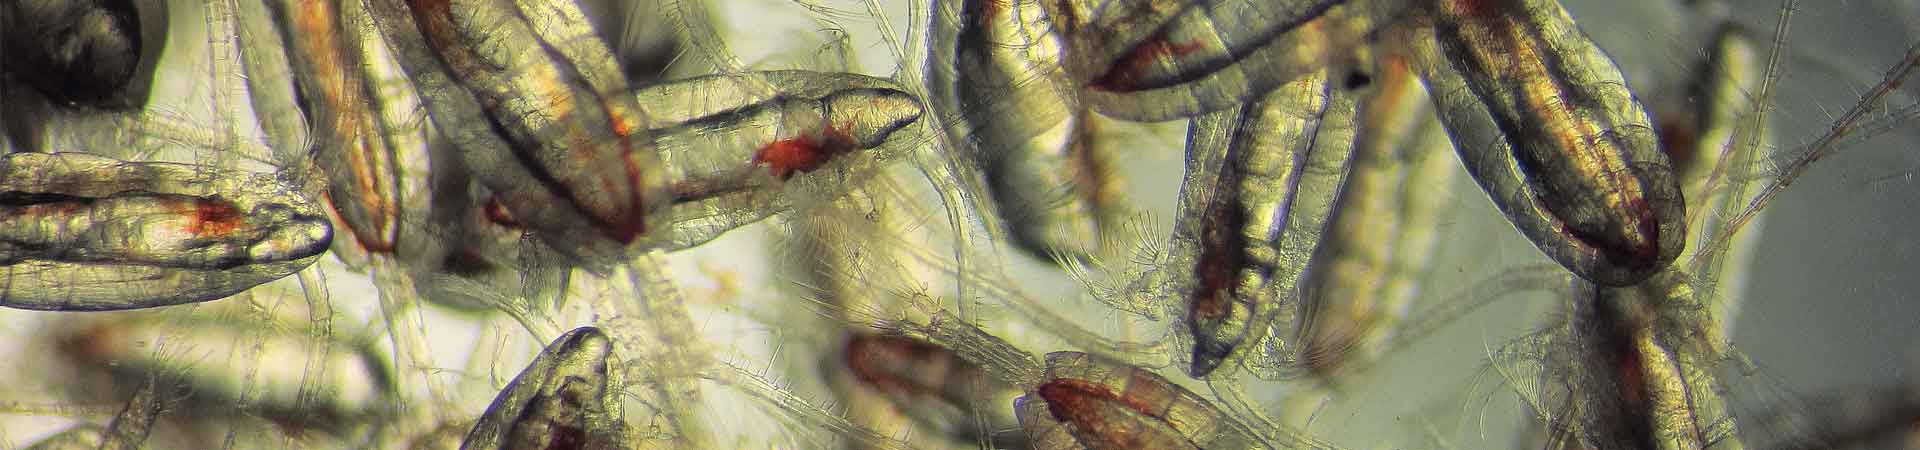 Microscope photo of several calanoid copepods (animal plankton) from the Arctic